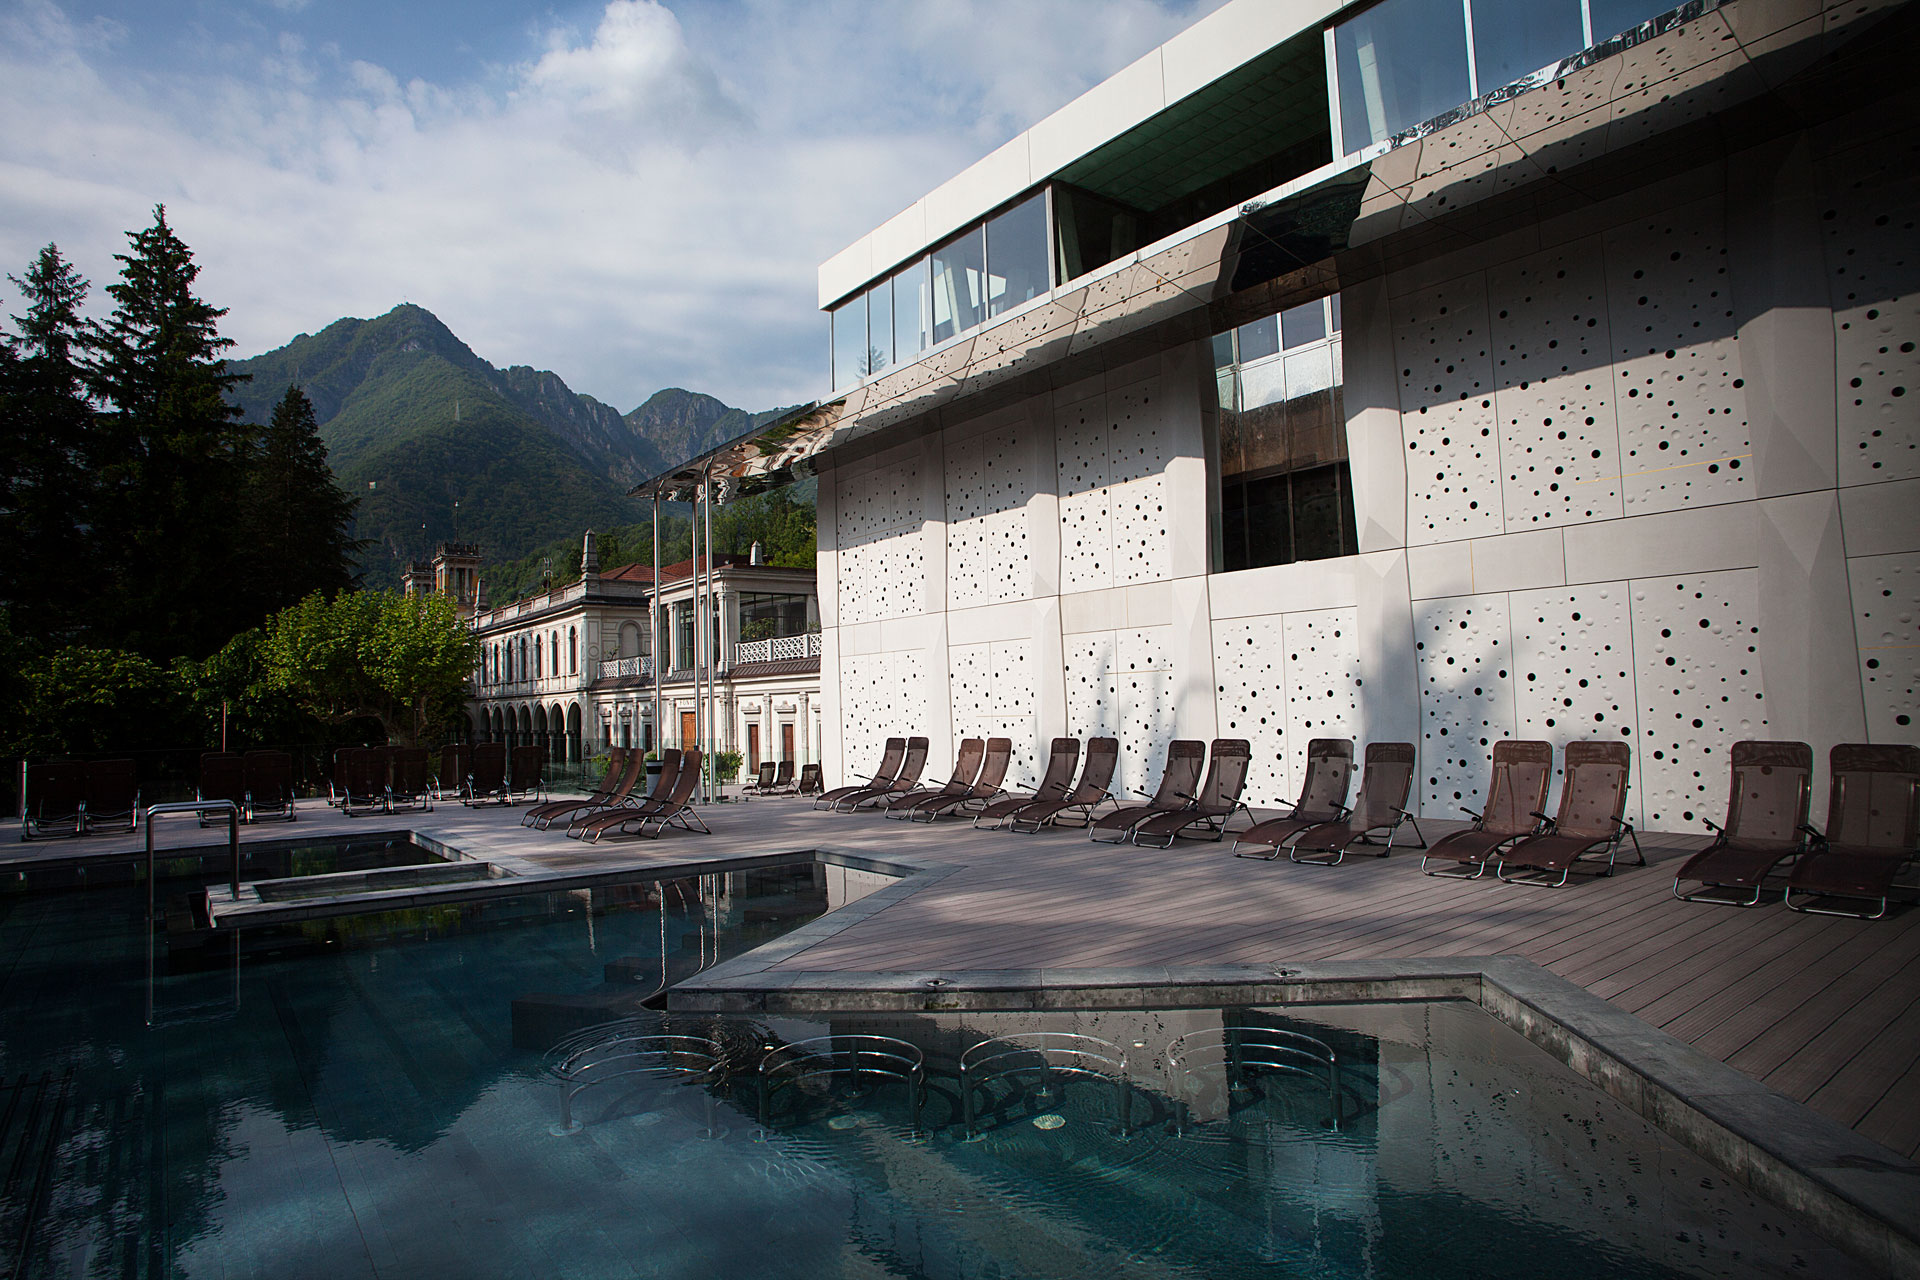 Hotel Des Thermes Spa a San Pellegrino Terme by SCE Project